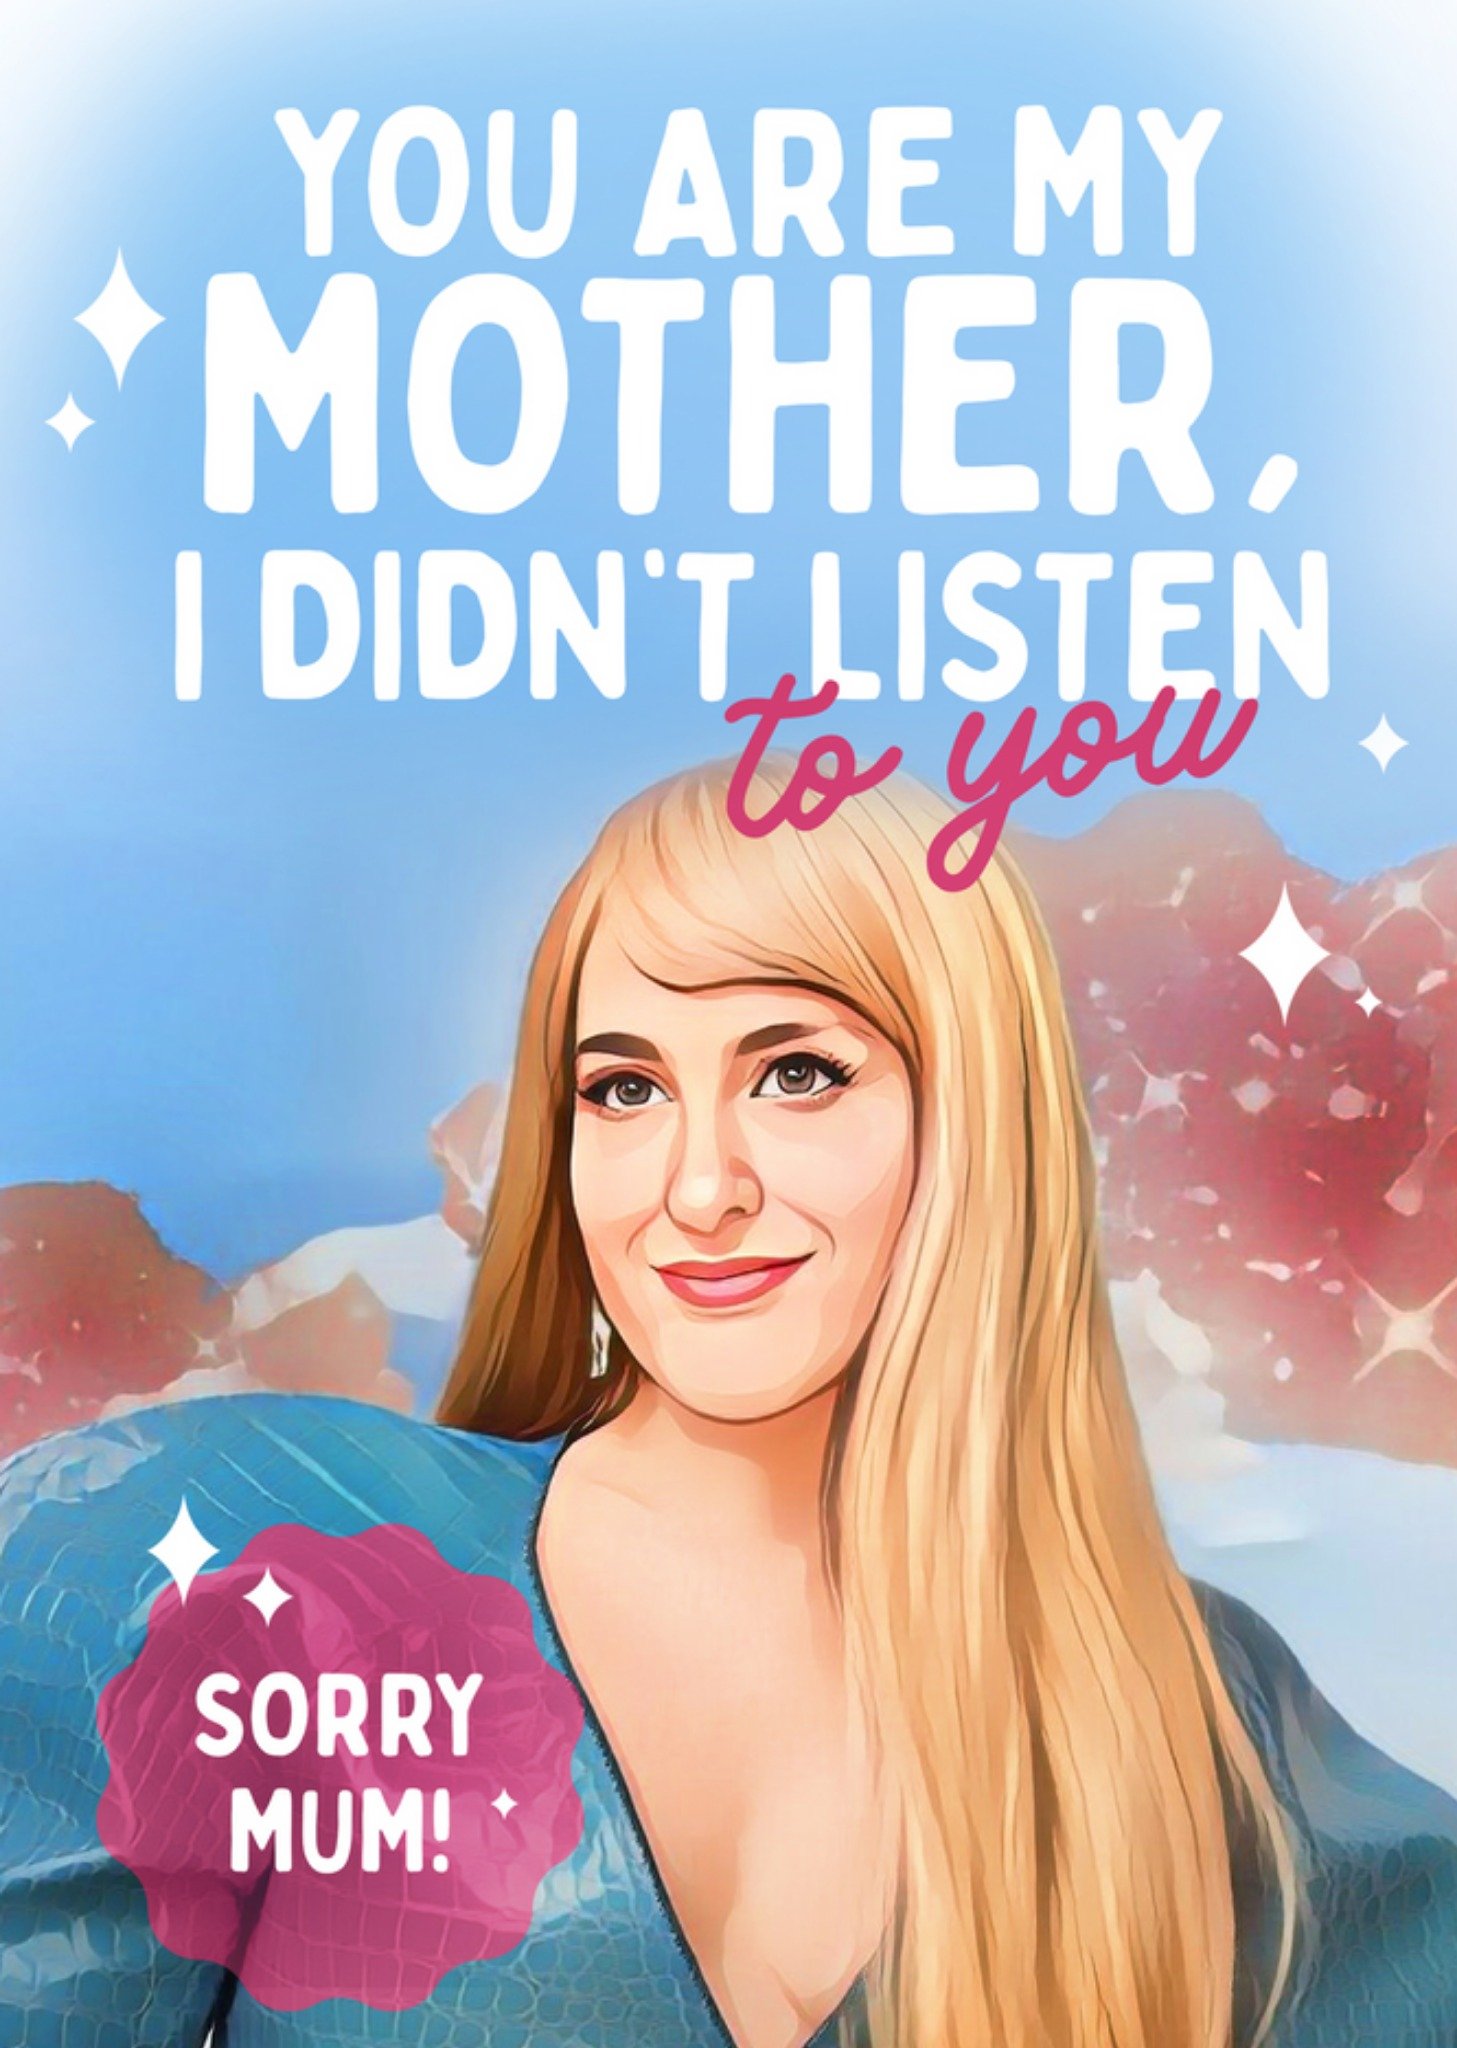 Moonpig You Are My Mother, I Didn't Listen To You Card, Large